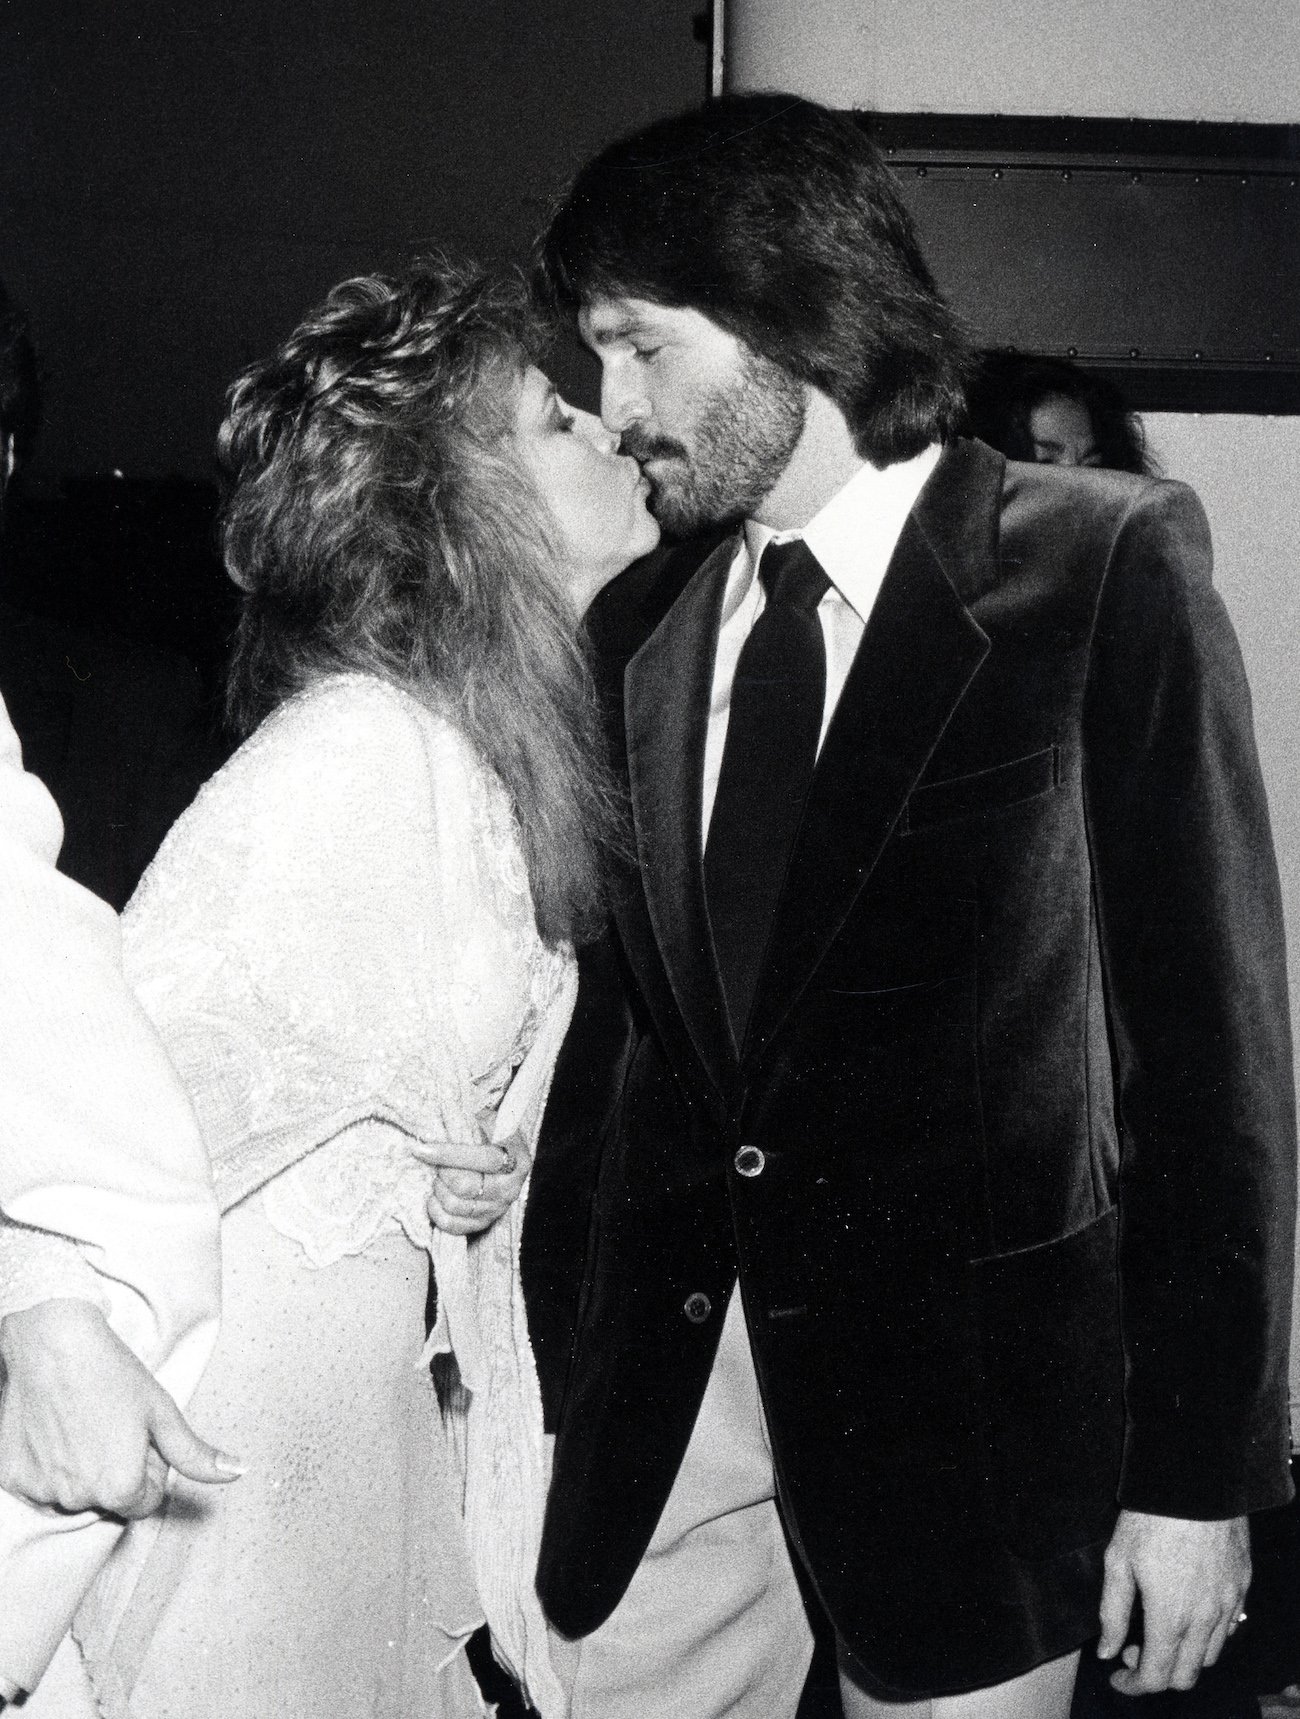 Stevie Nicks and her then-husband, Kim Anderson kissing.